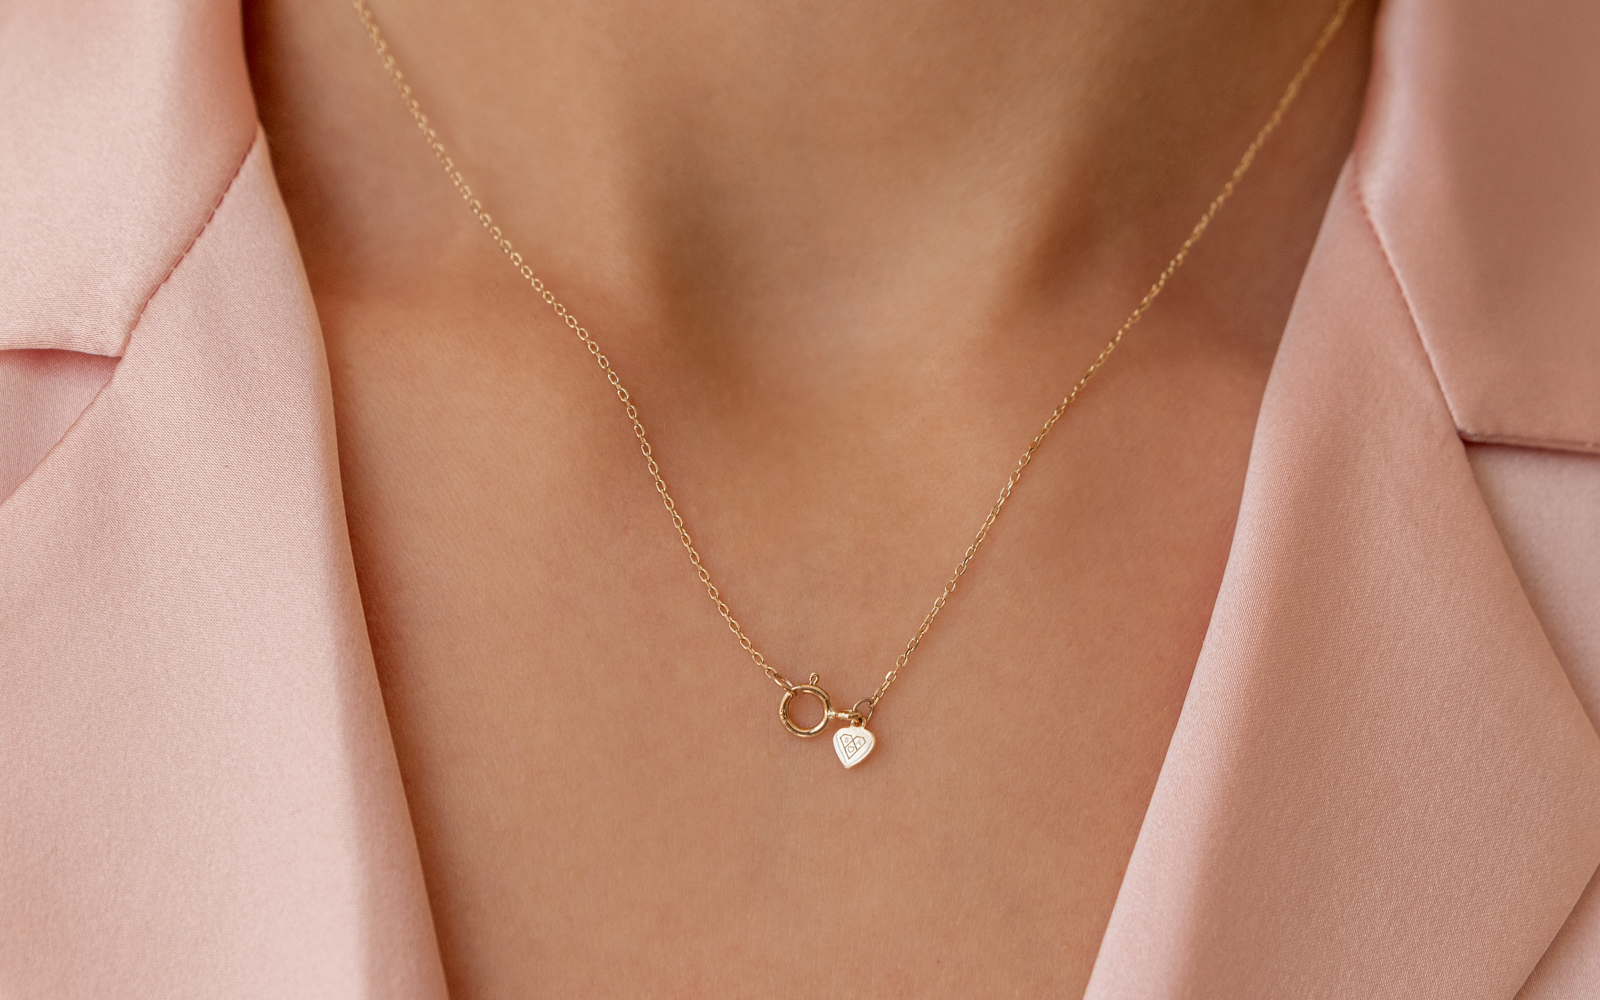 Nameplate Babe Necklace Yellow Gold